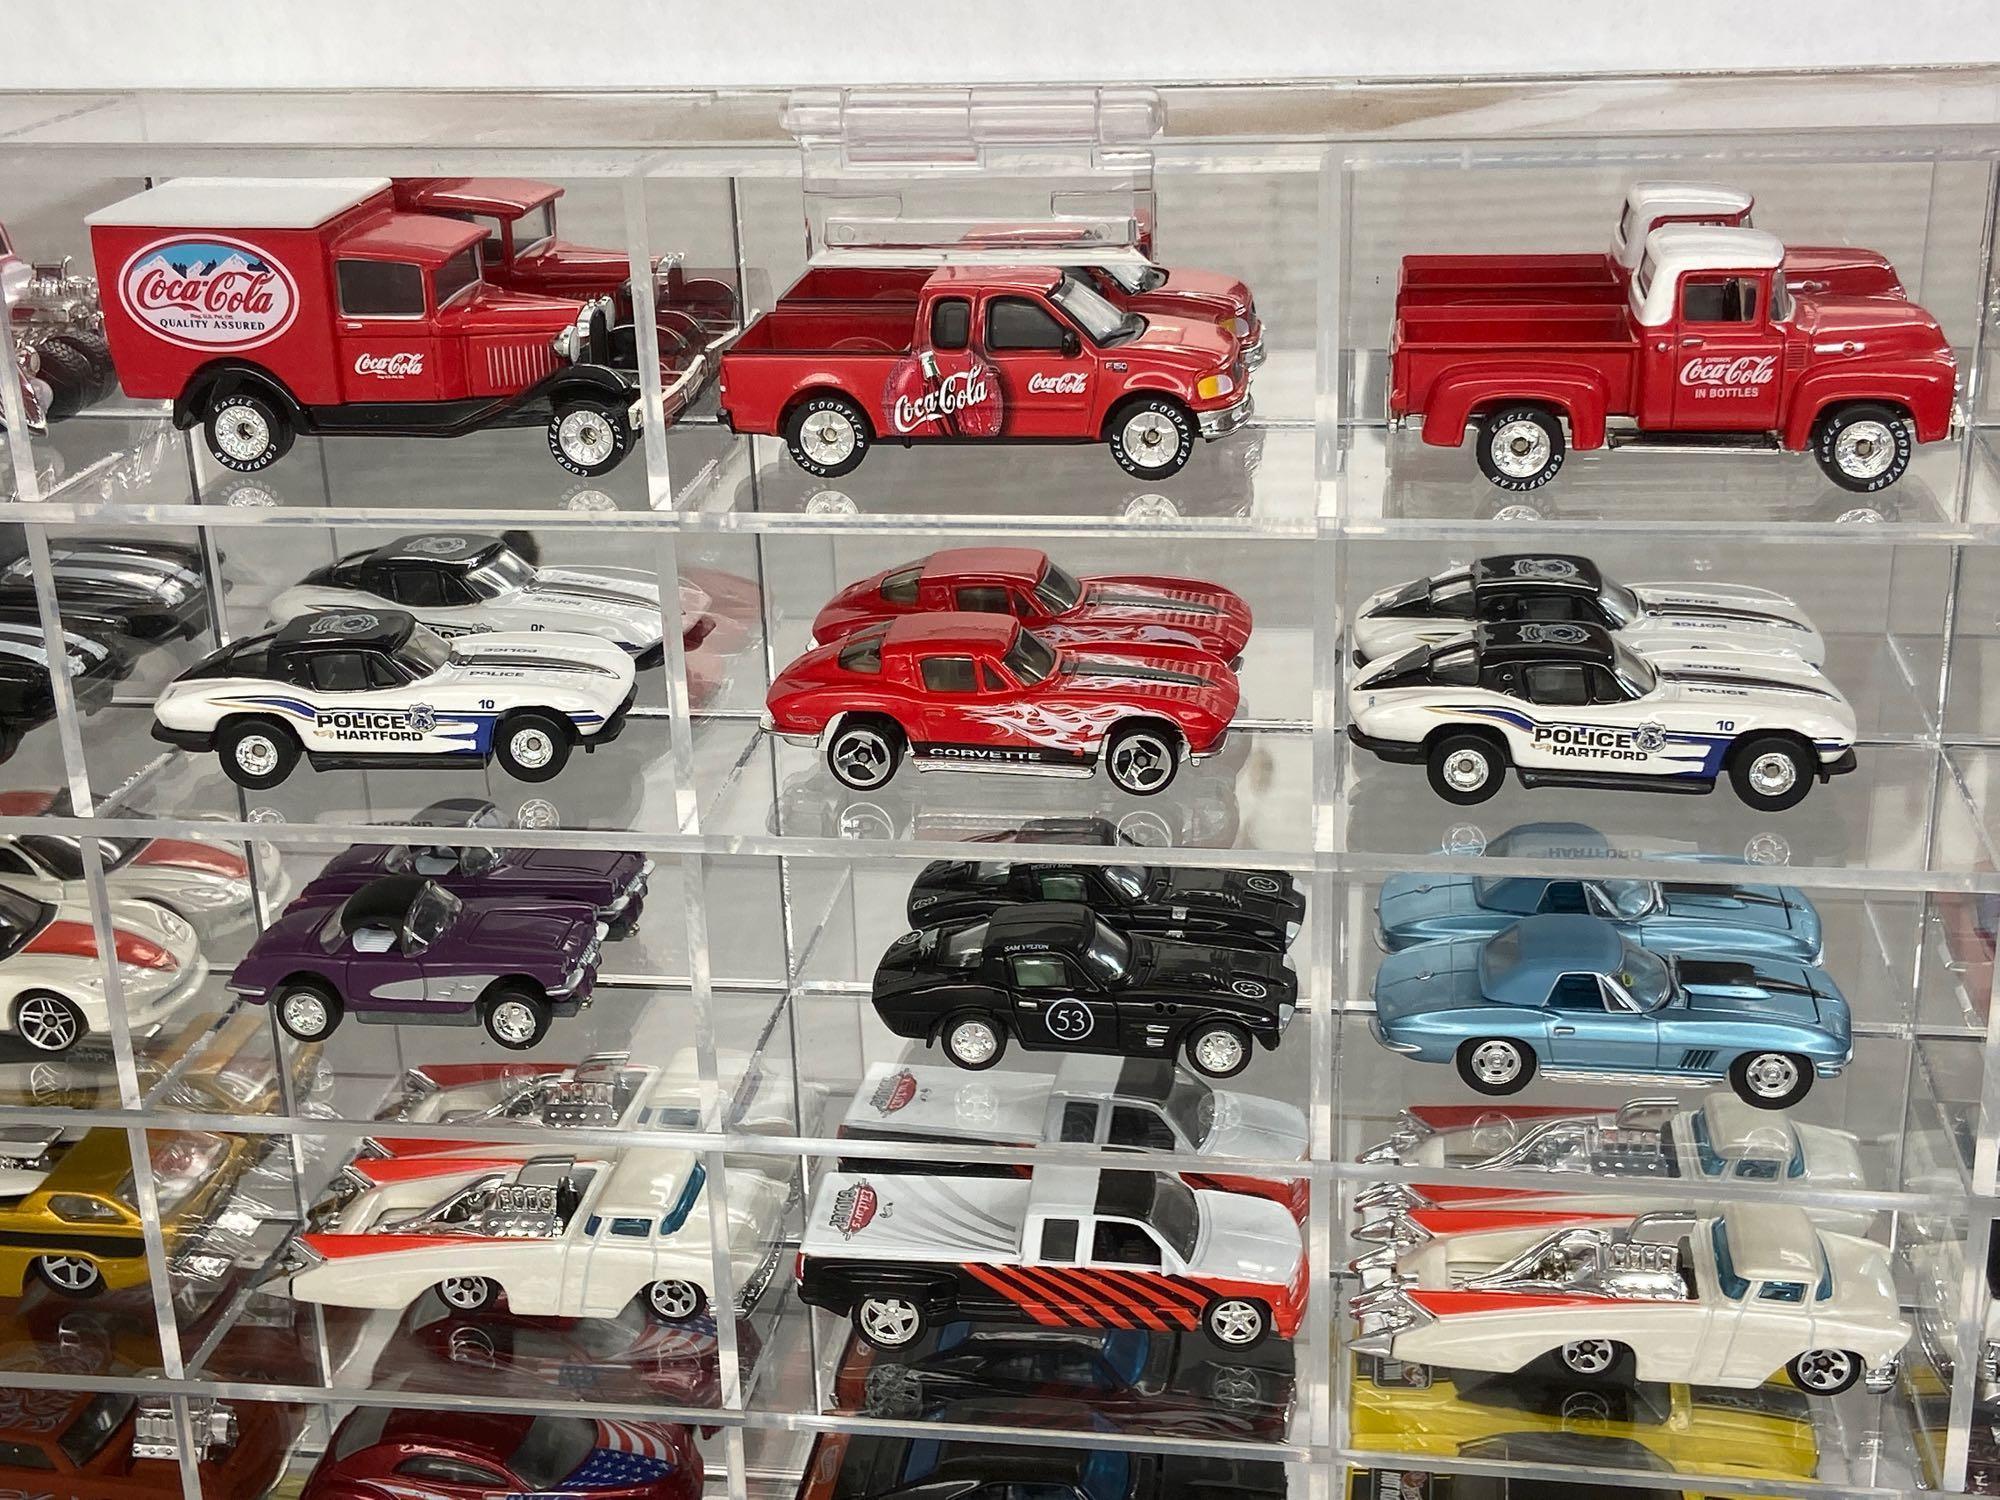 Toy Car Collection, Hotwheels, in Mirrored Display Case 32x24in